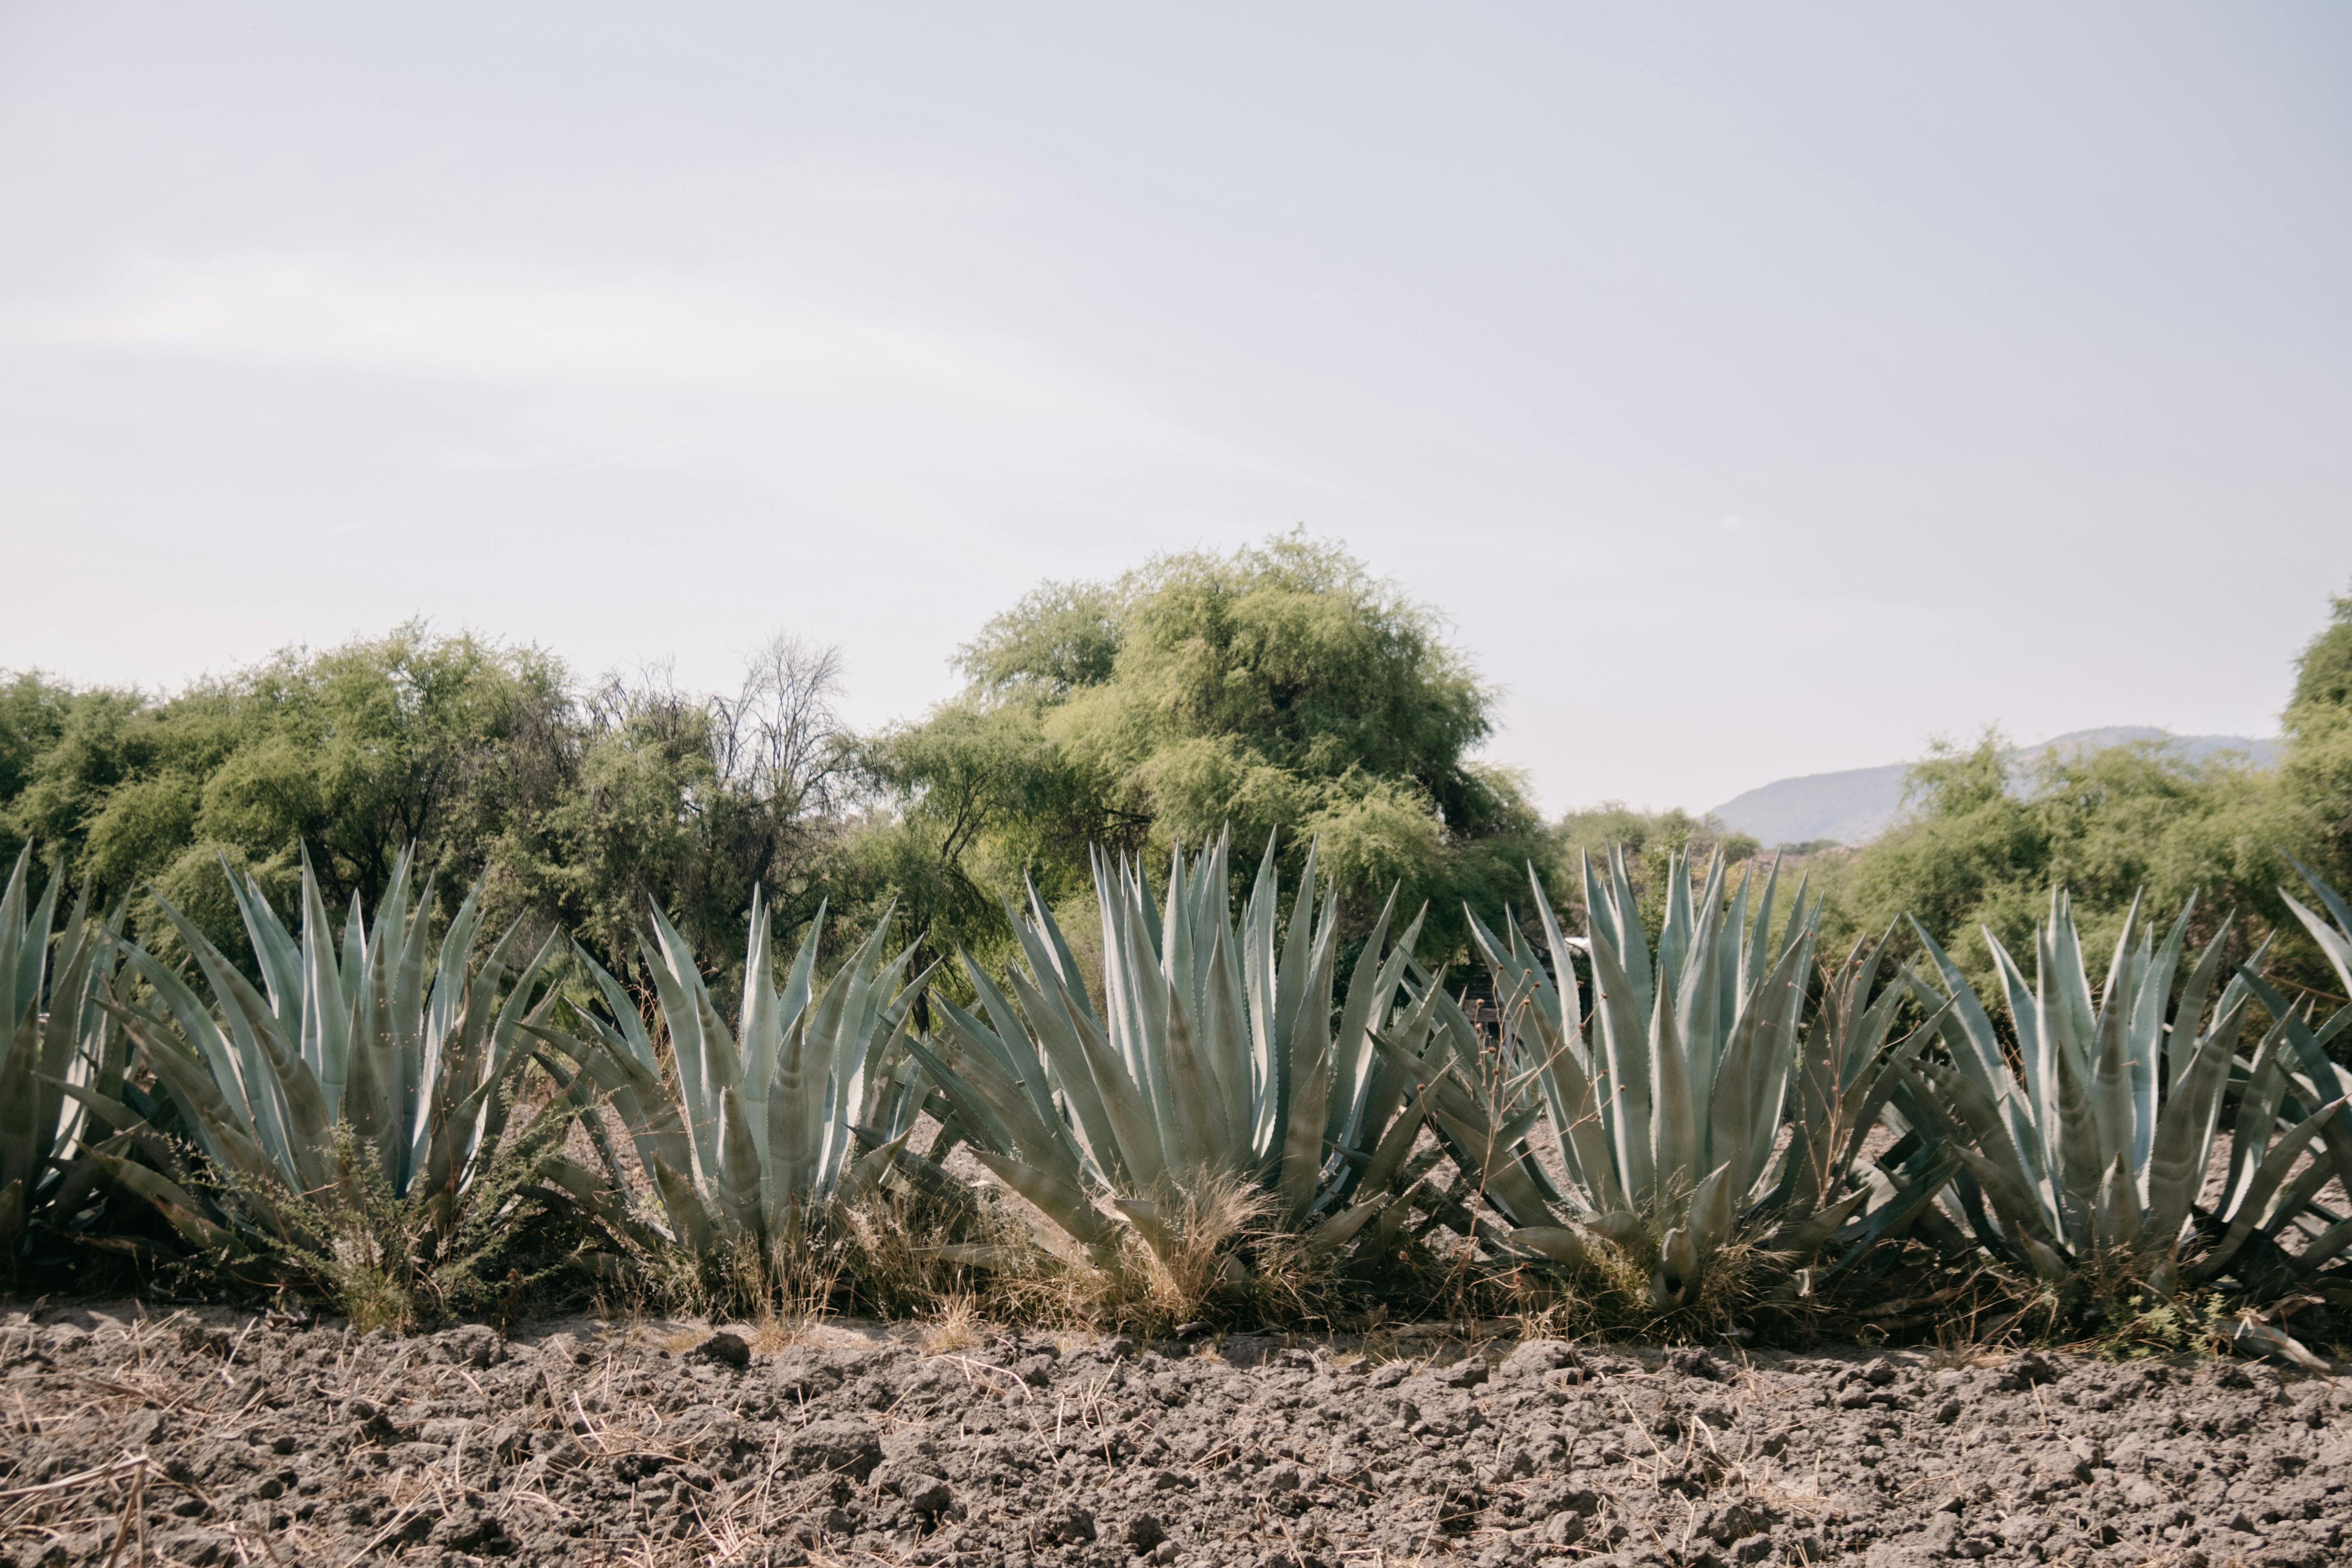 Desert Agave Photos, Download The BEST Free Desert Agave Stock Photos ...